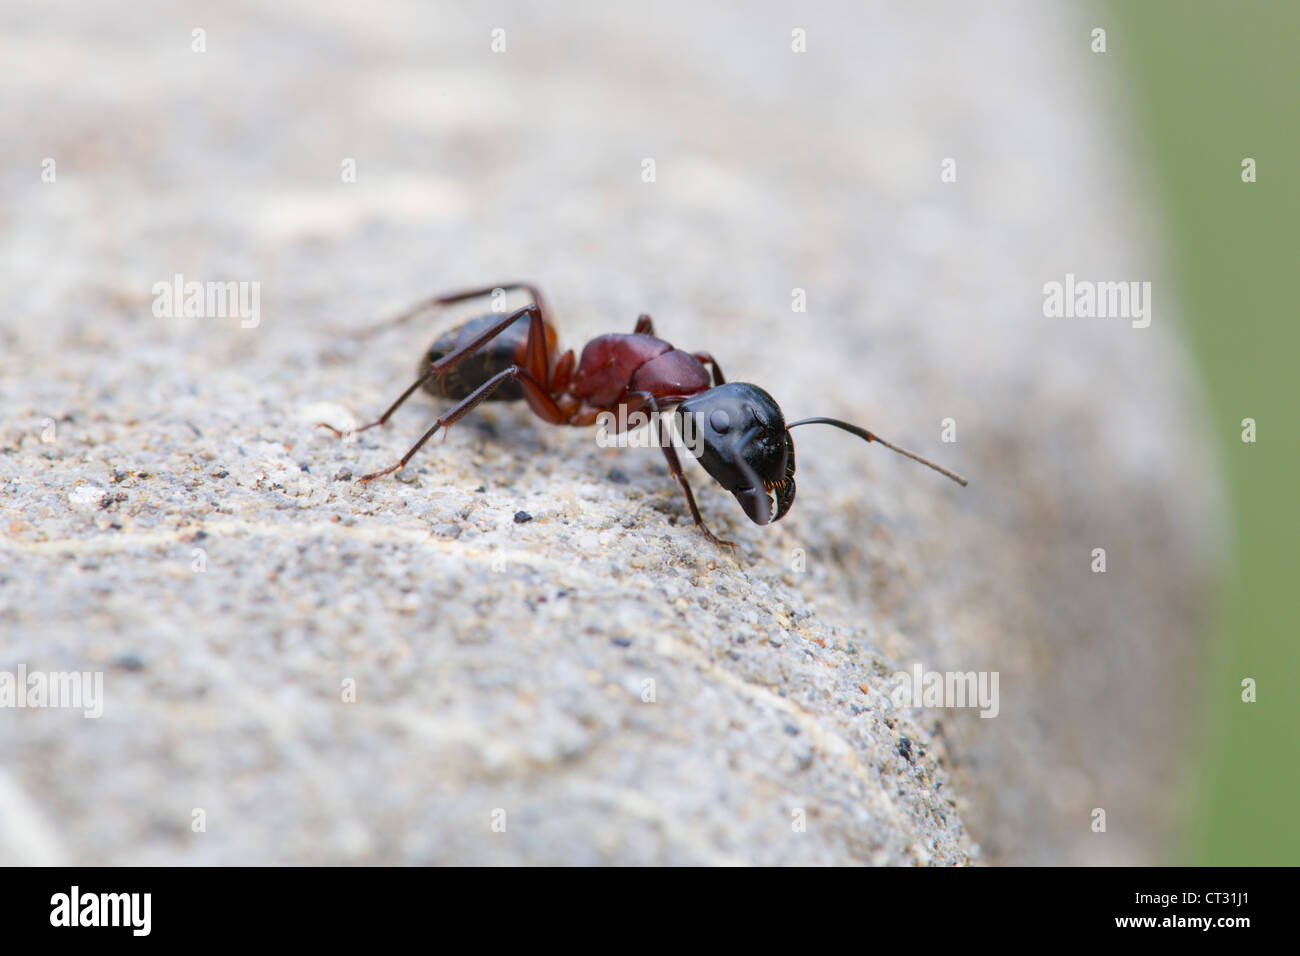 Ant on rock; close up; Spain Stock Photo